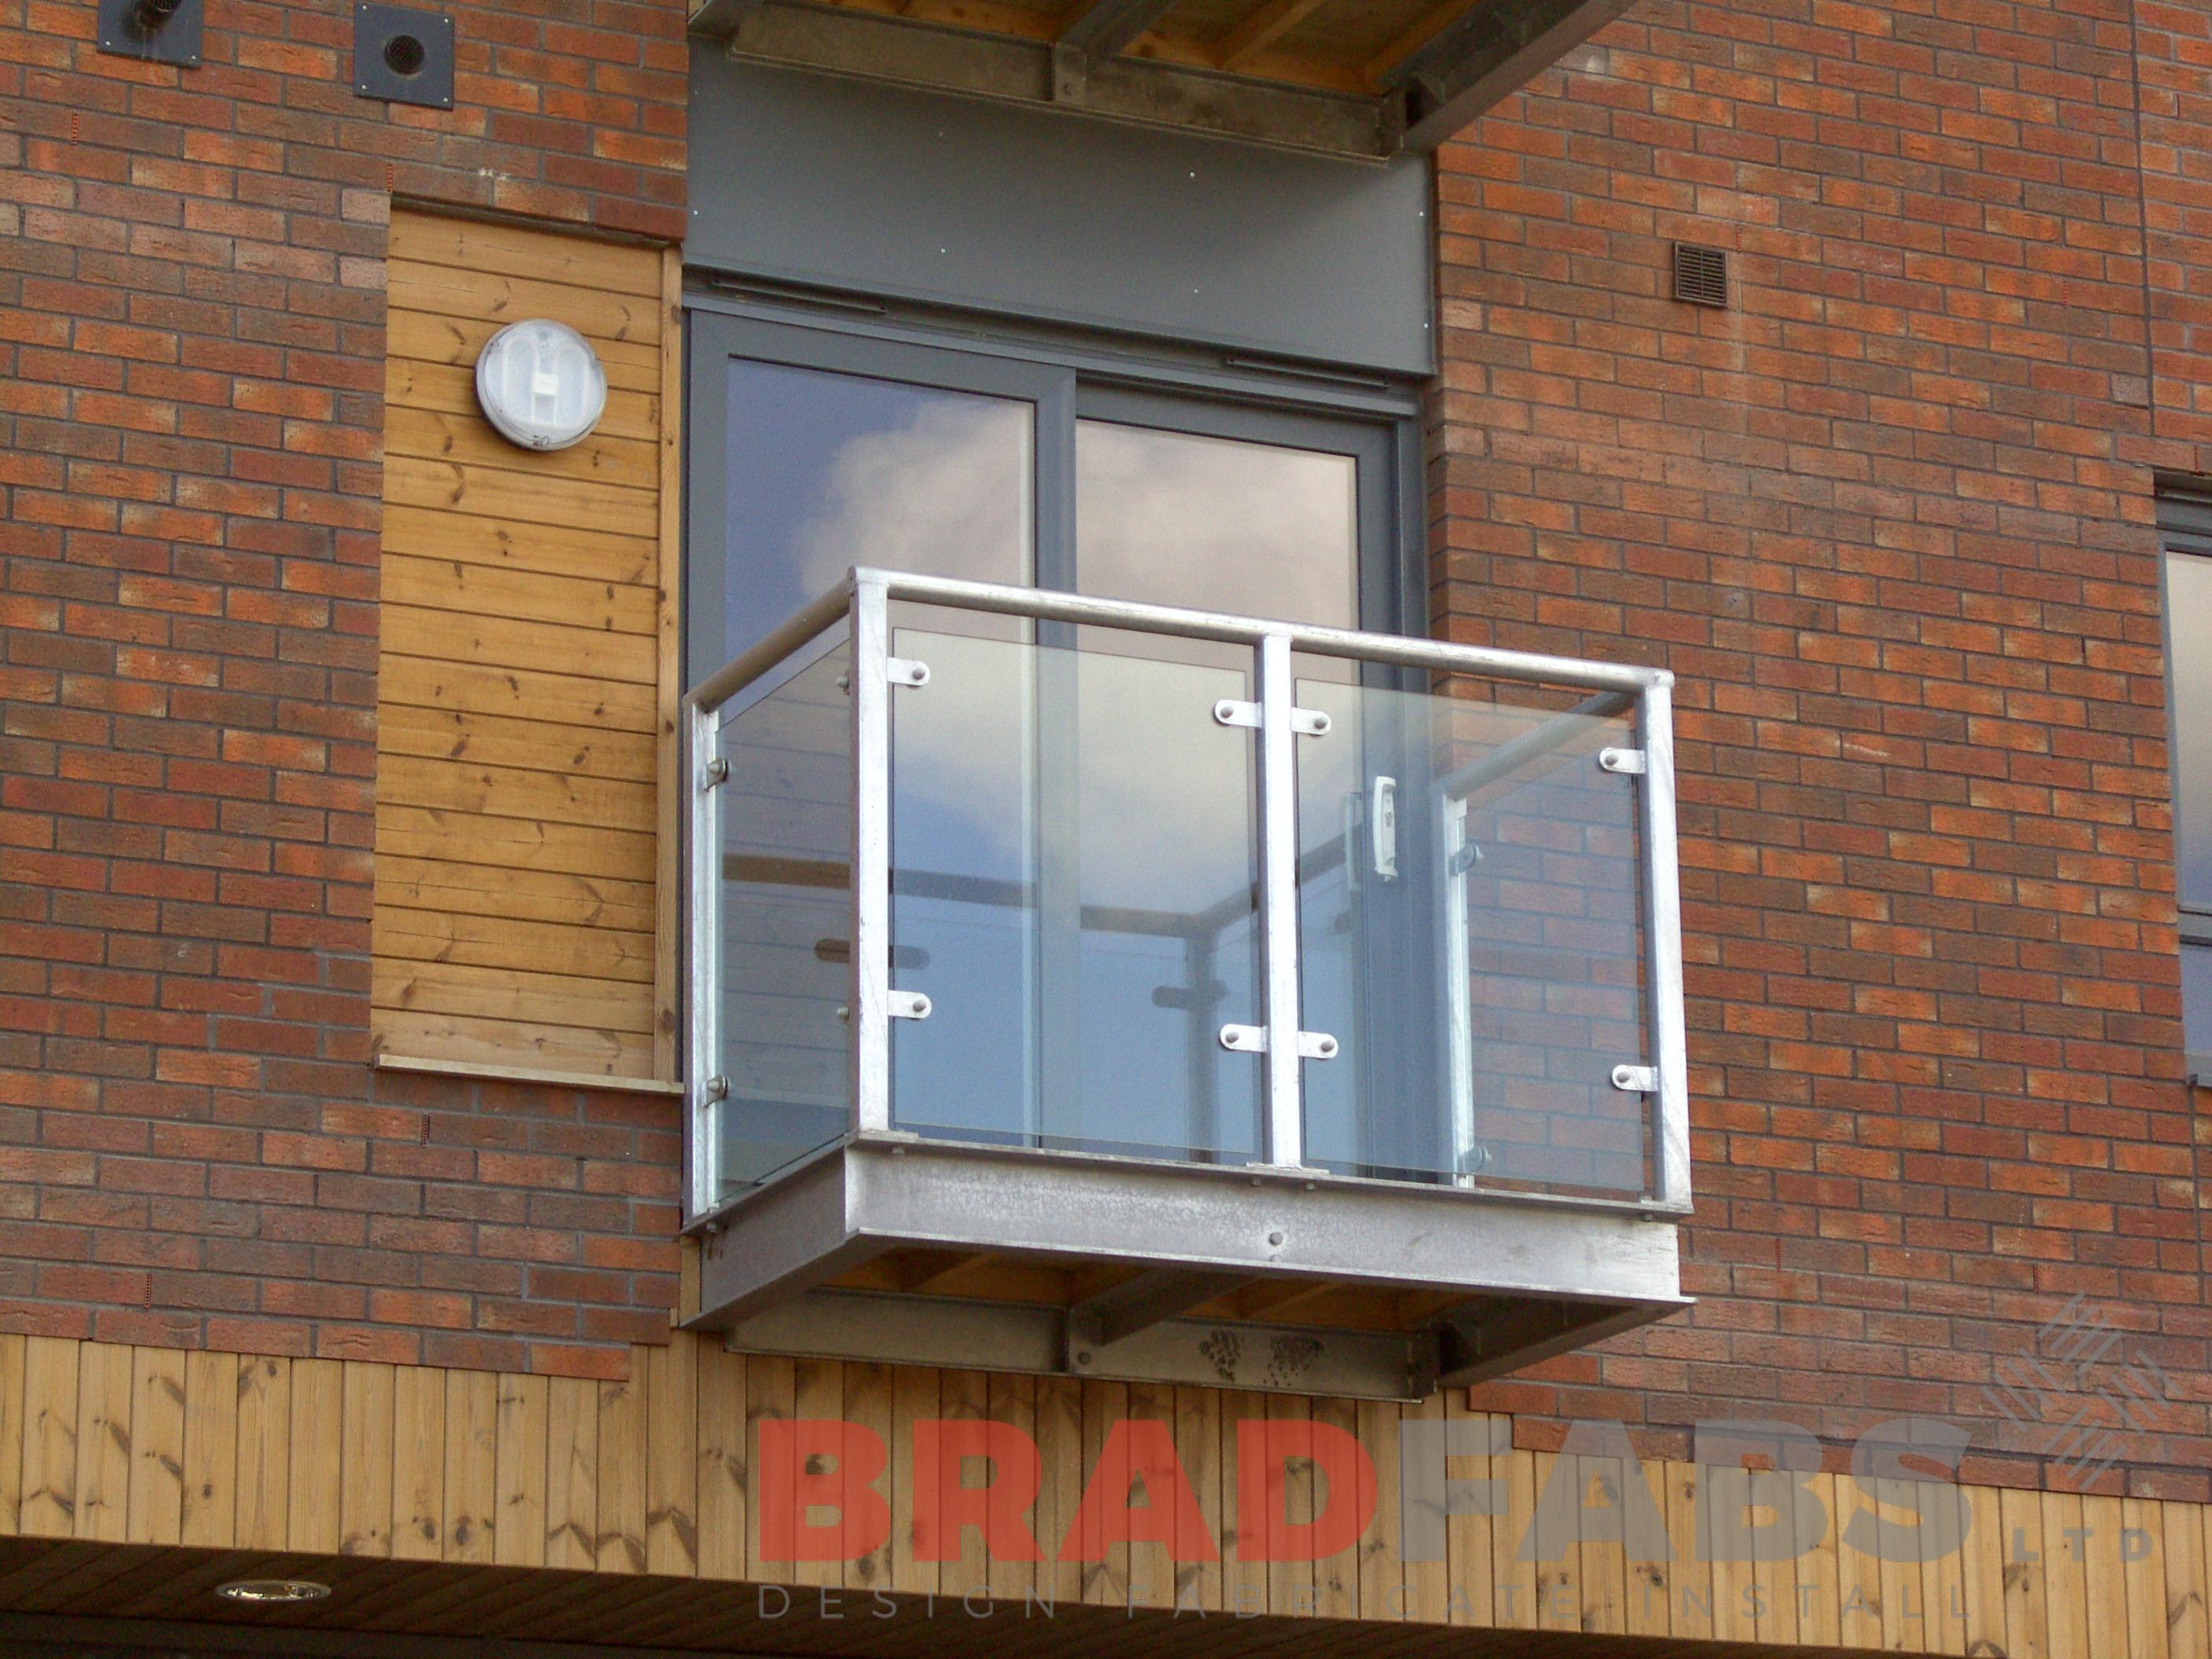 High Quanity Balconies fabricated by Bradfabs in England